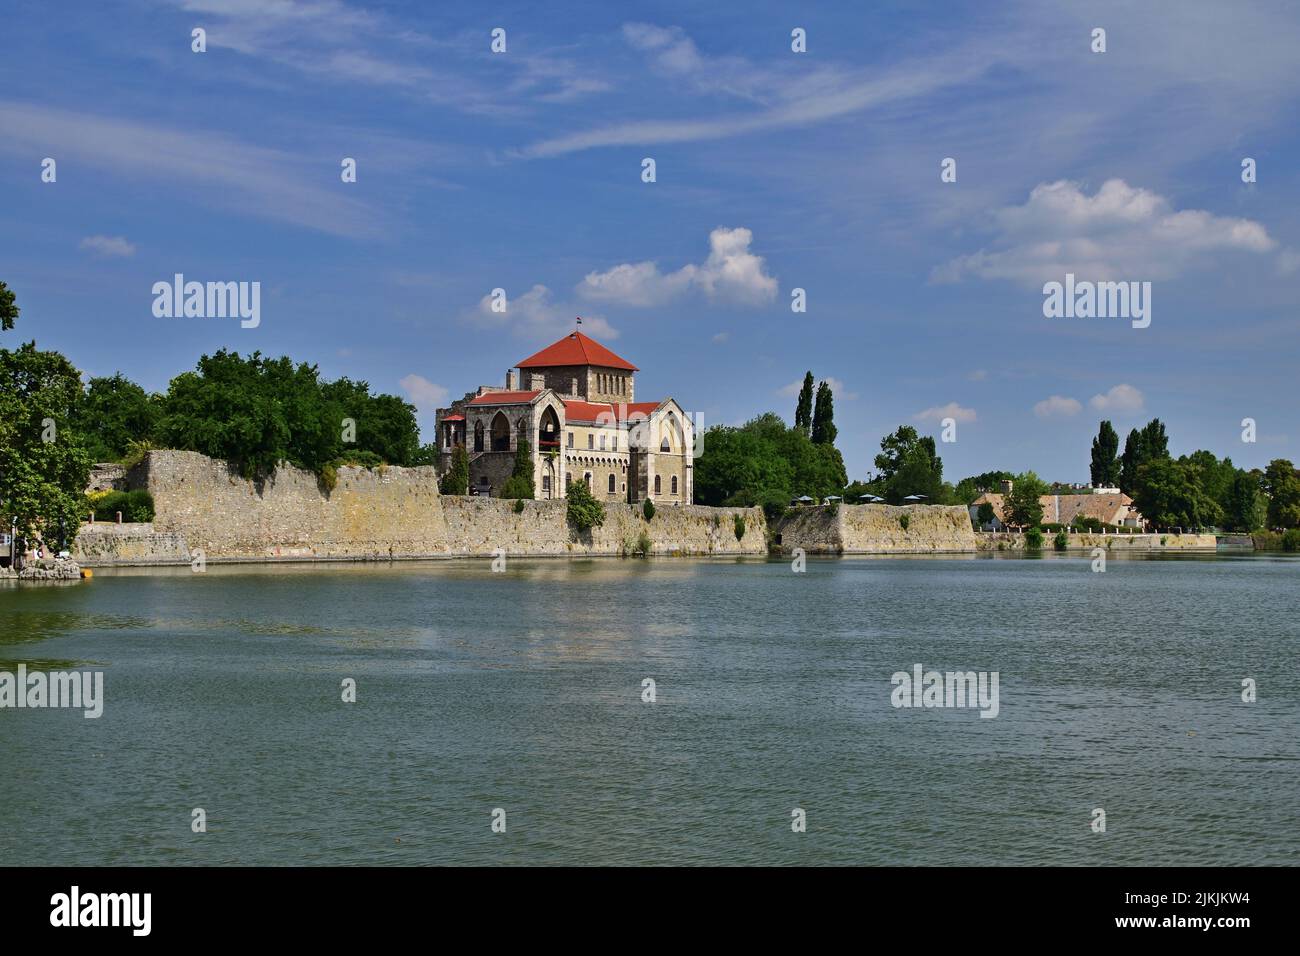 Tata castle next to the Old Lake in Hungary on a summer day Stock Photo